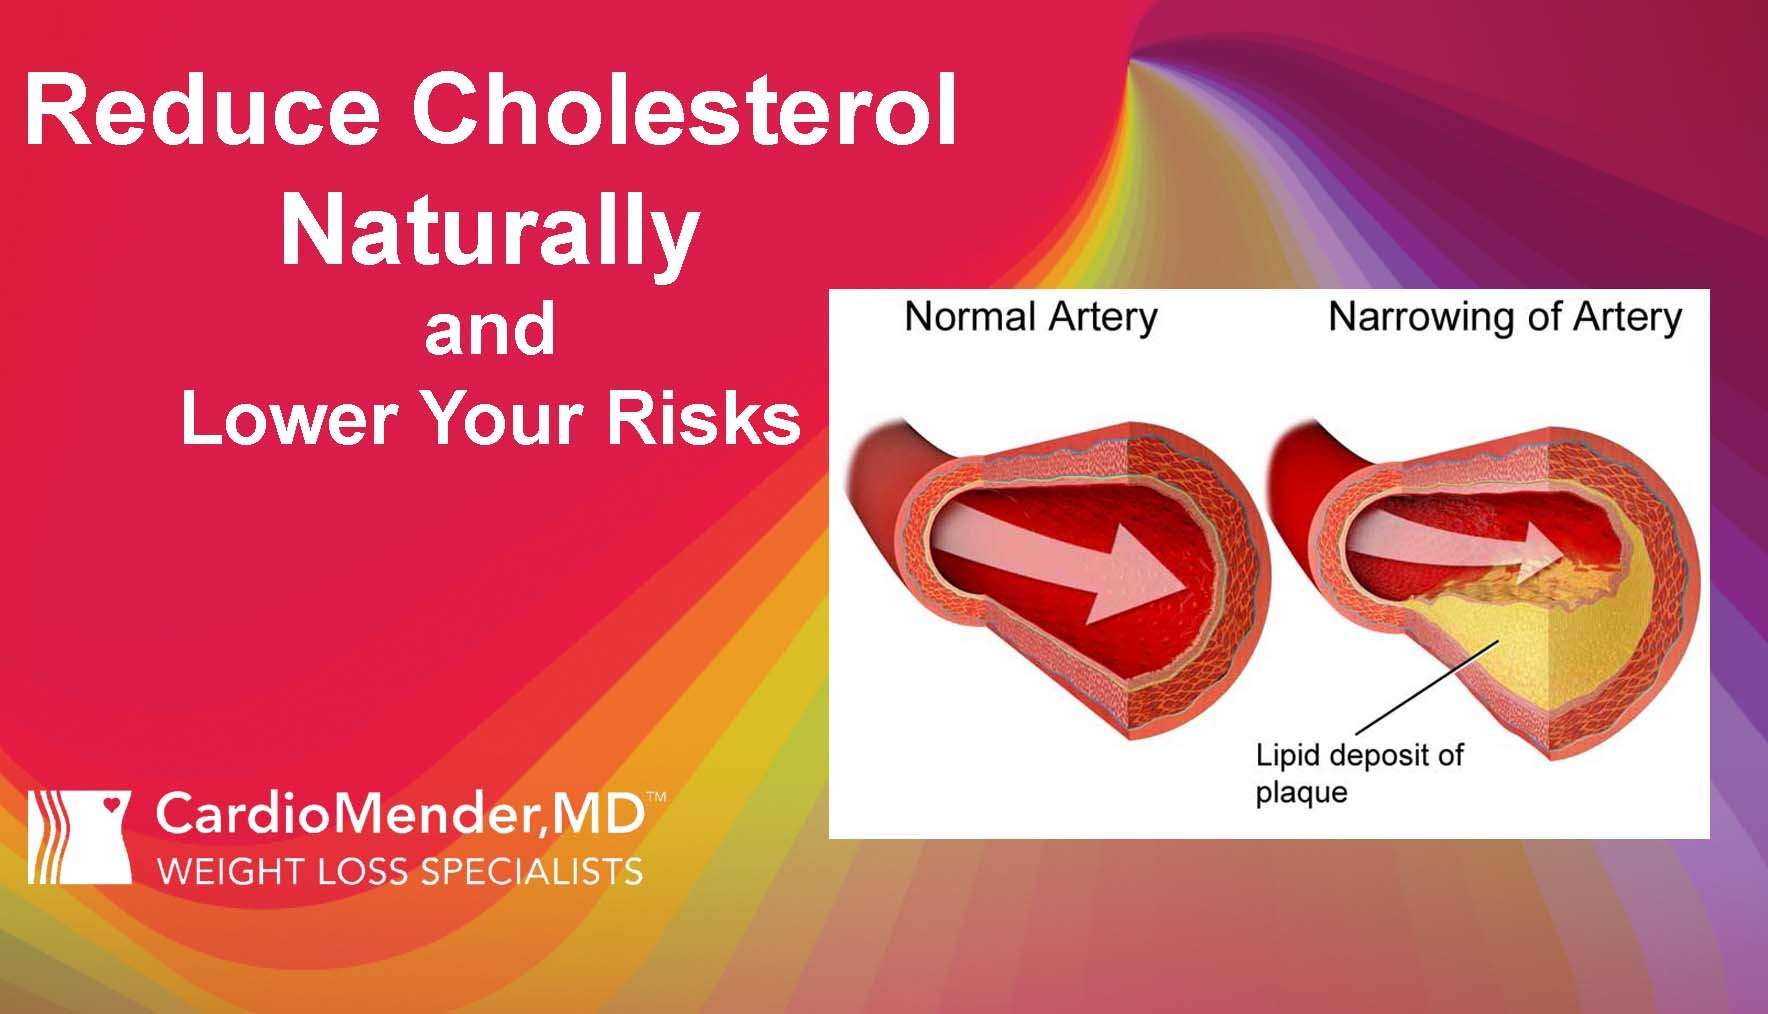 Reduce Cholesterol Naturally using Plant Sterols and Stanols ...